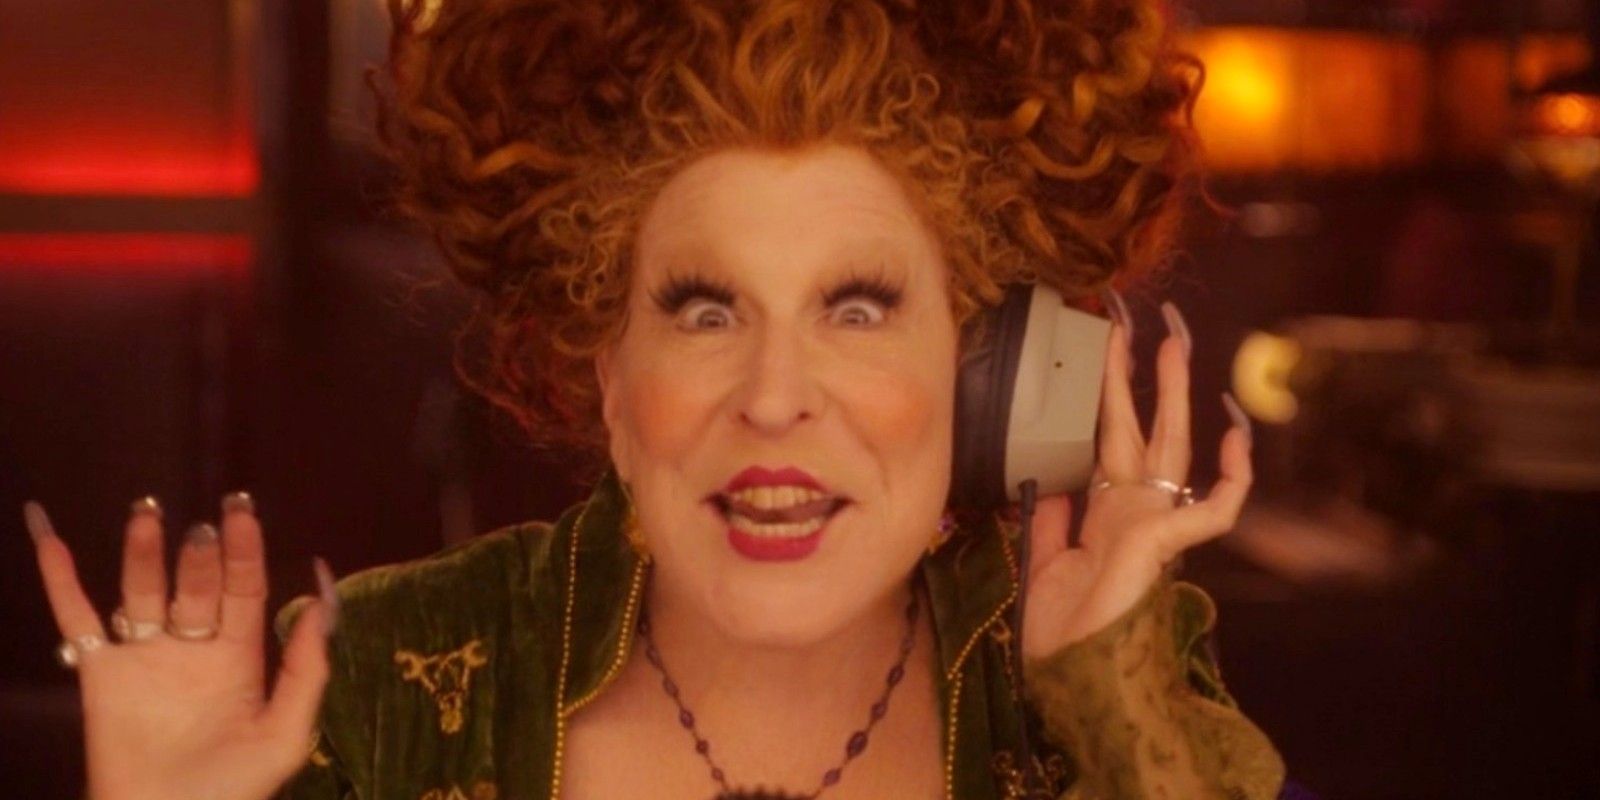 Winifred holding the phone to her ear in Hocus Pocus 2